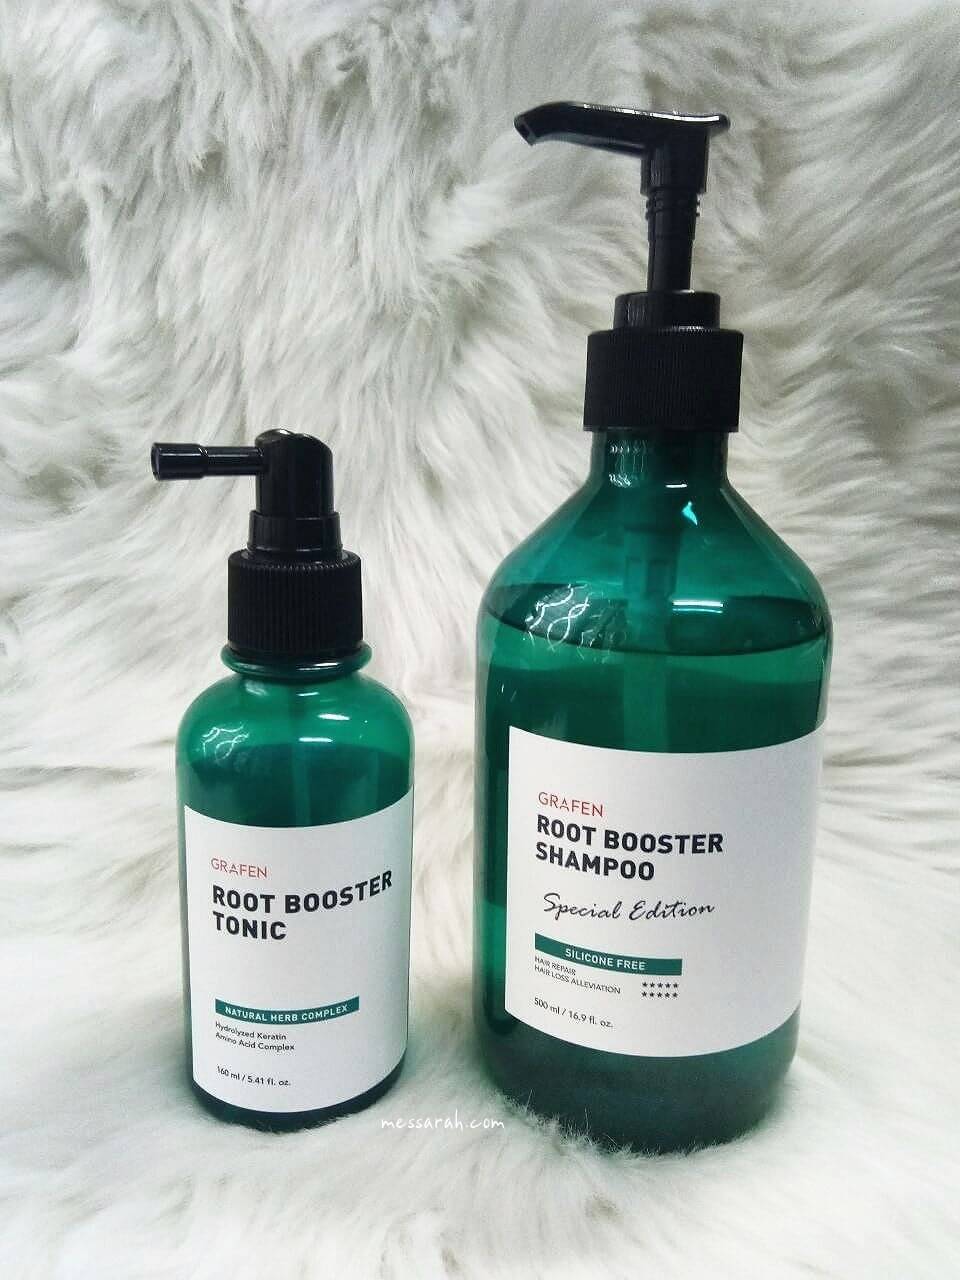 Grafen Root Booster Shampoo and Grafen Root Booster Tonic Review